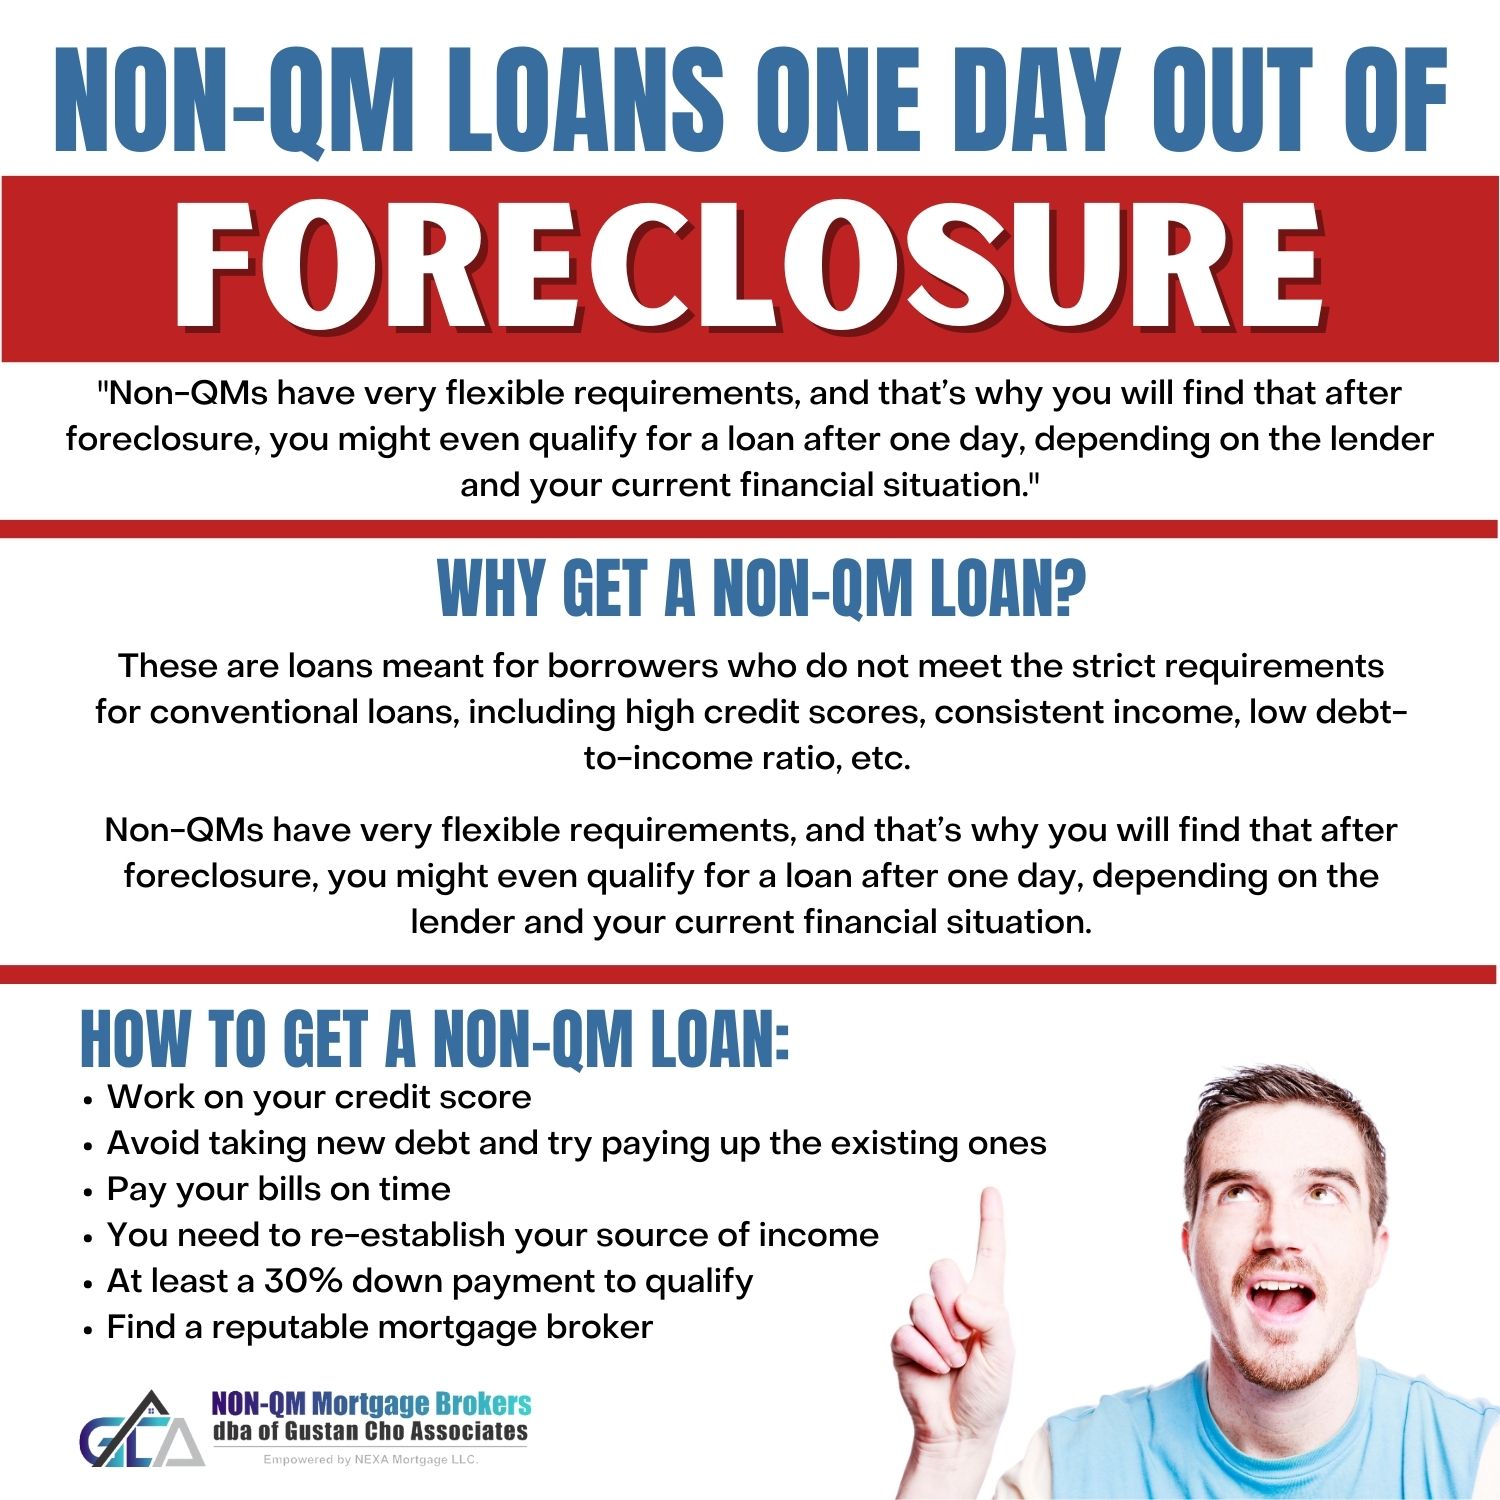 Non-QM Loans One Day Out of Foreclosure